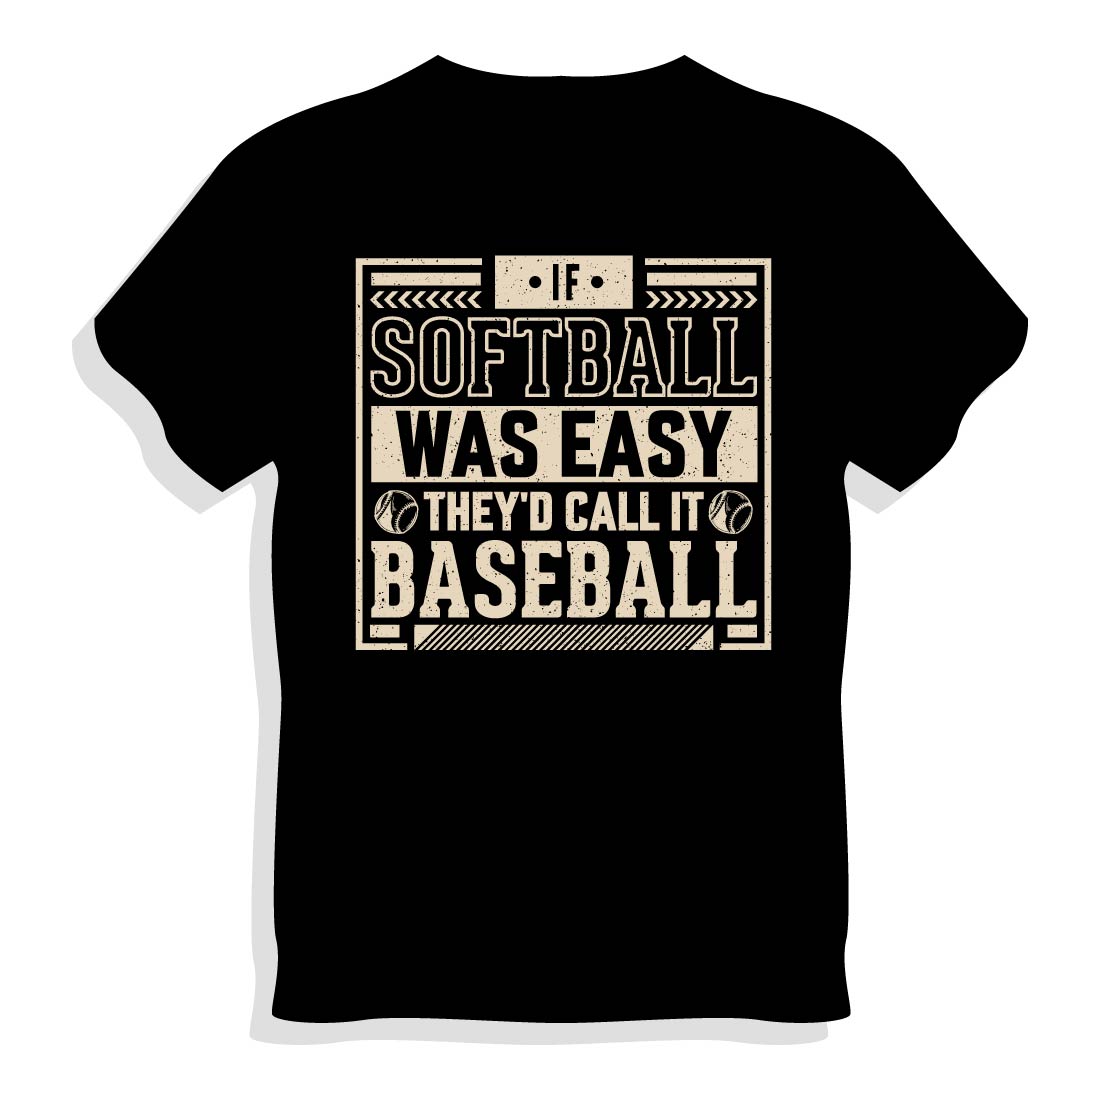 Baseball T-shirt Design, IF softball was easy they'd call it